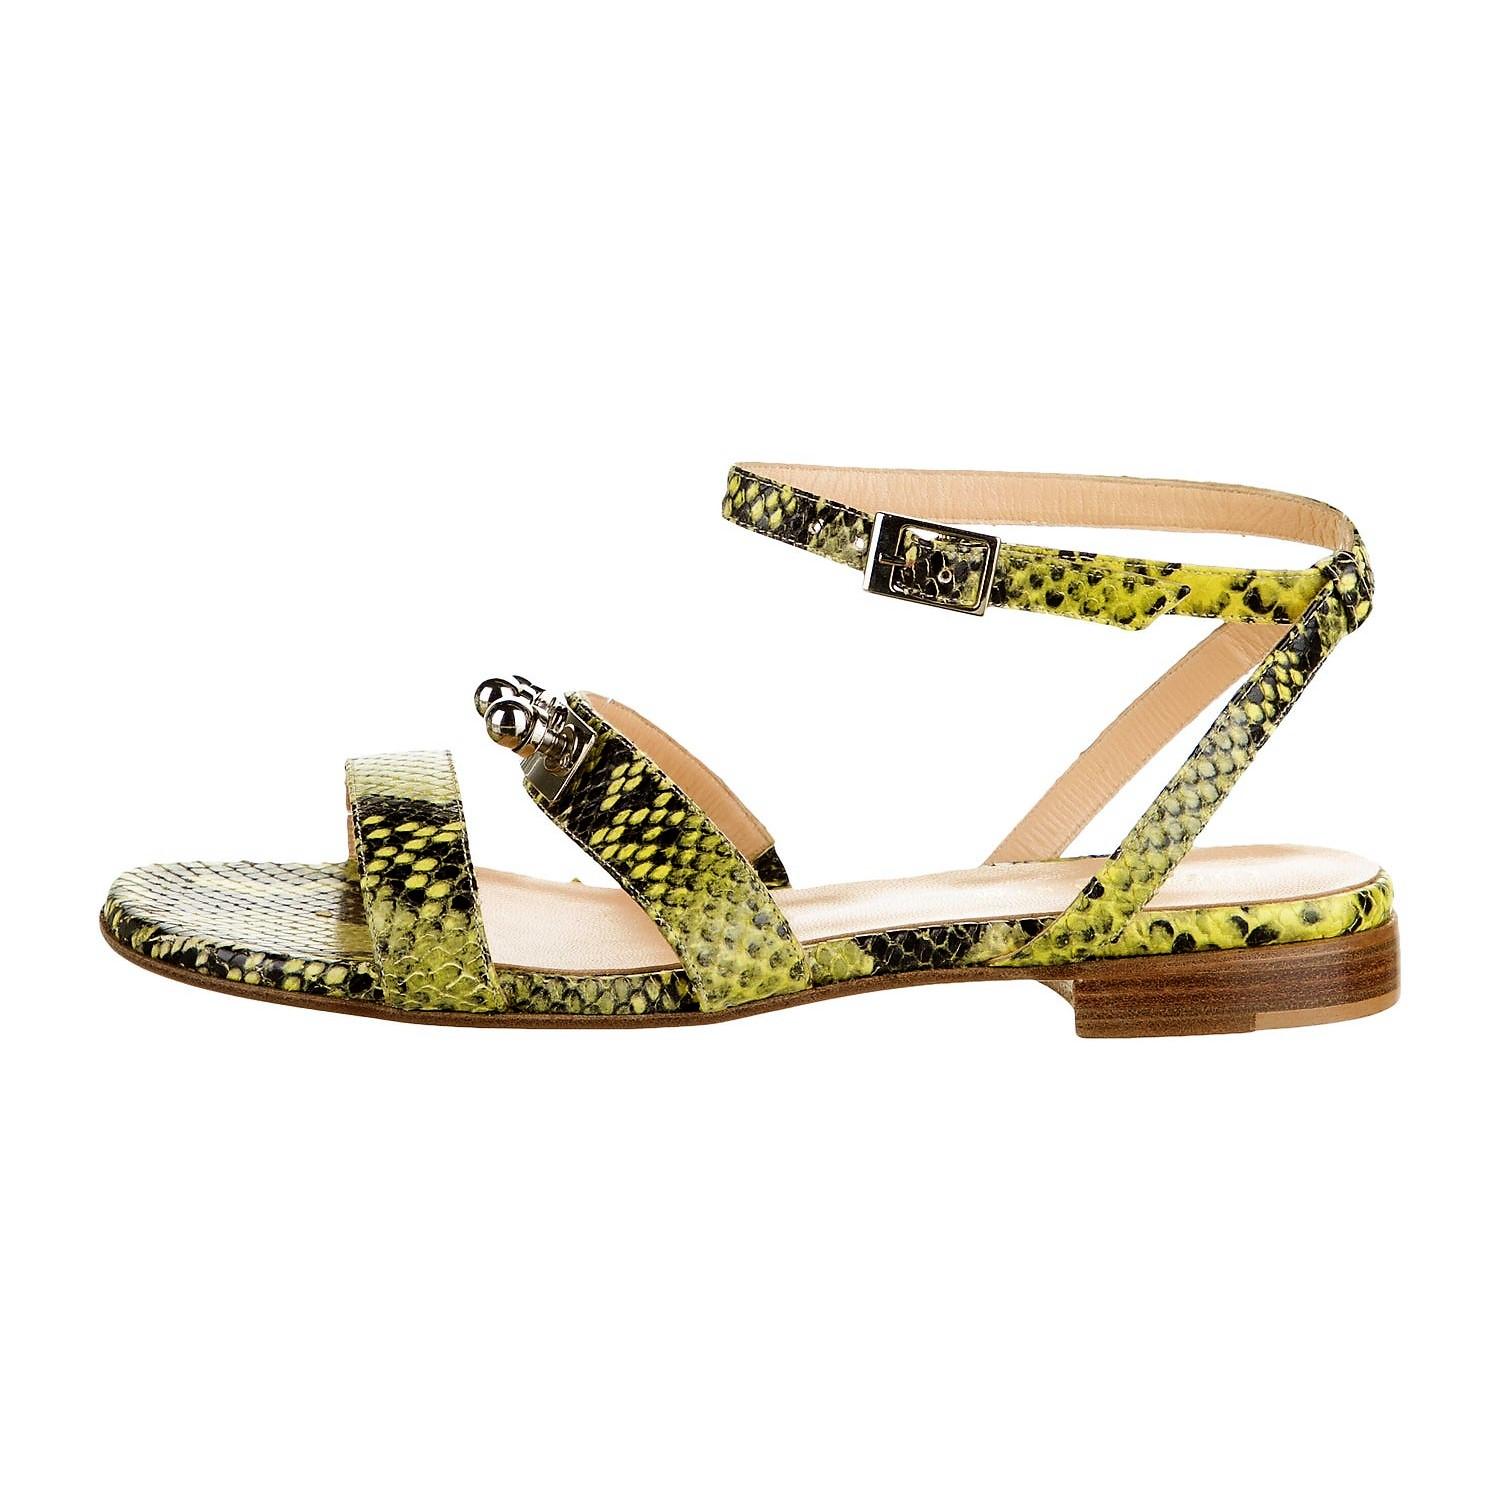 Eugenia Kim
$975
* Yellow & Black Genuine Python
Metal Accent
Adjustable Ankle Strap
* Eugenia Kim did a limited collection of stunning shoes, 
we were lucky to get a few pair!
* Size: 39 (these run a half size small, so a U.S. 8.5)
* Flats
Heels: